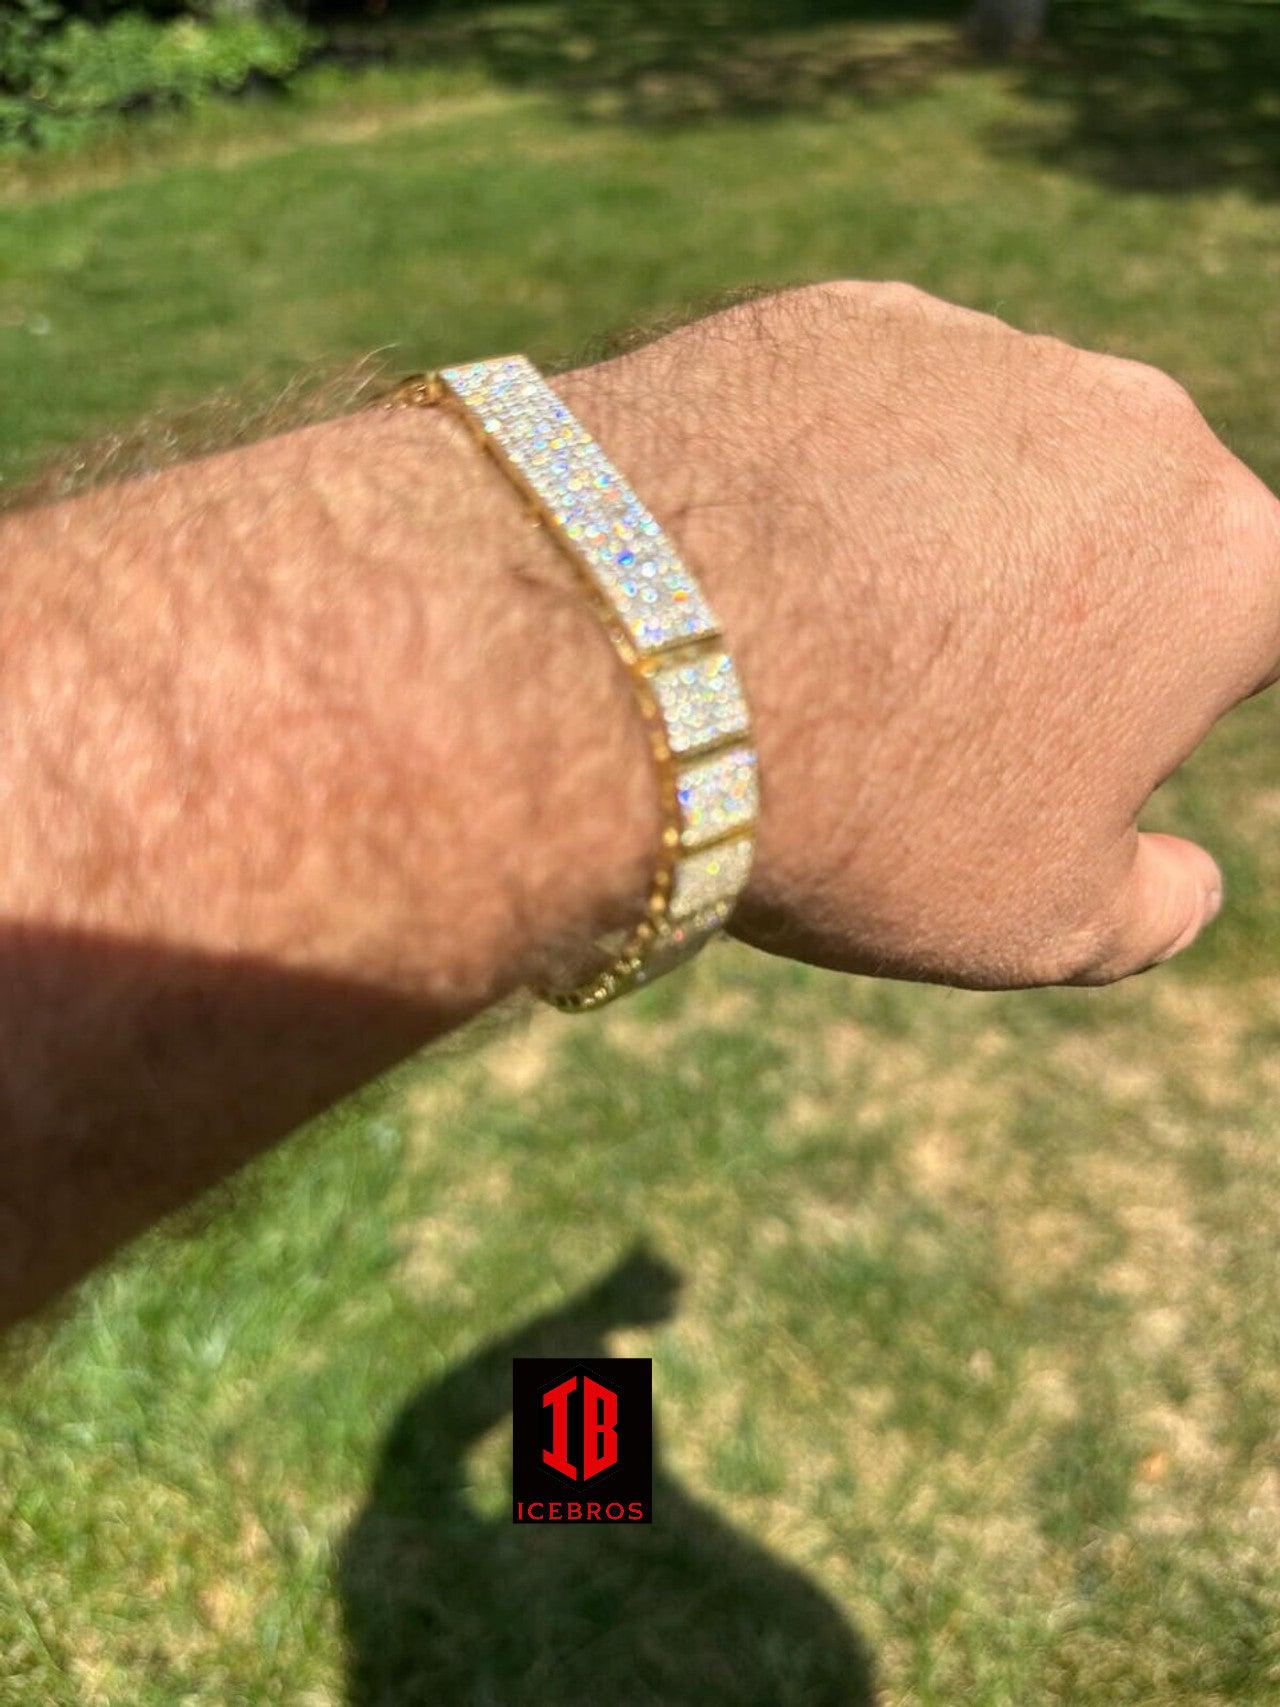 YELLOW GOLD Mens Custom Made ICY Hip Hop Bracelet 14k Gold Plated 925 Sterling Silver CZ